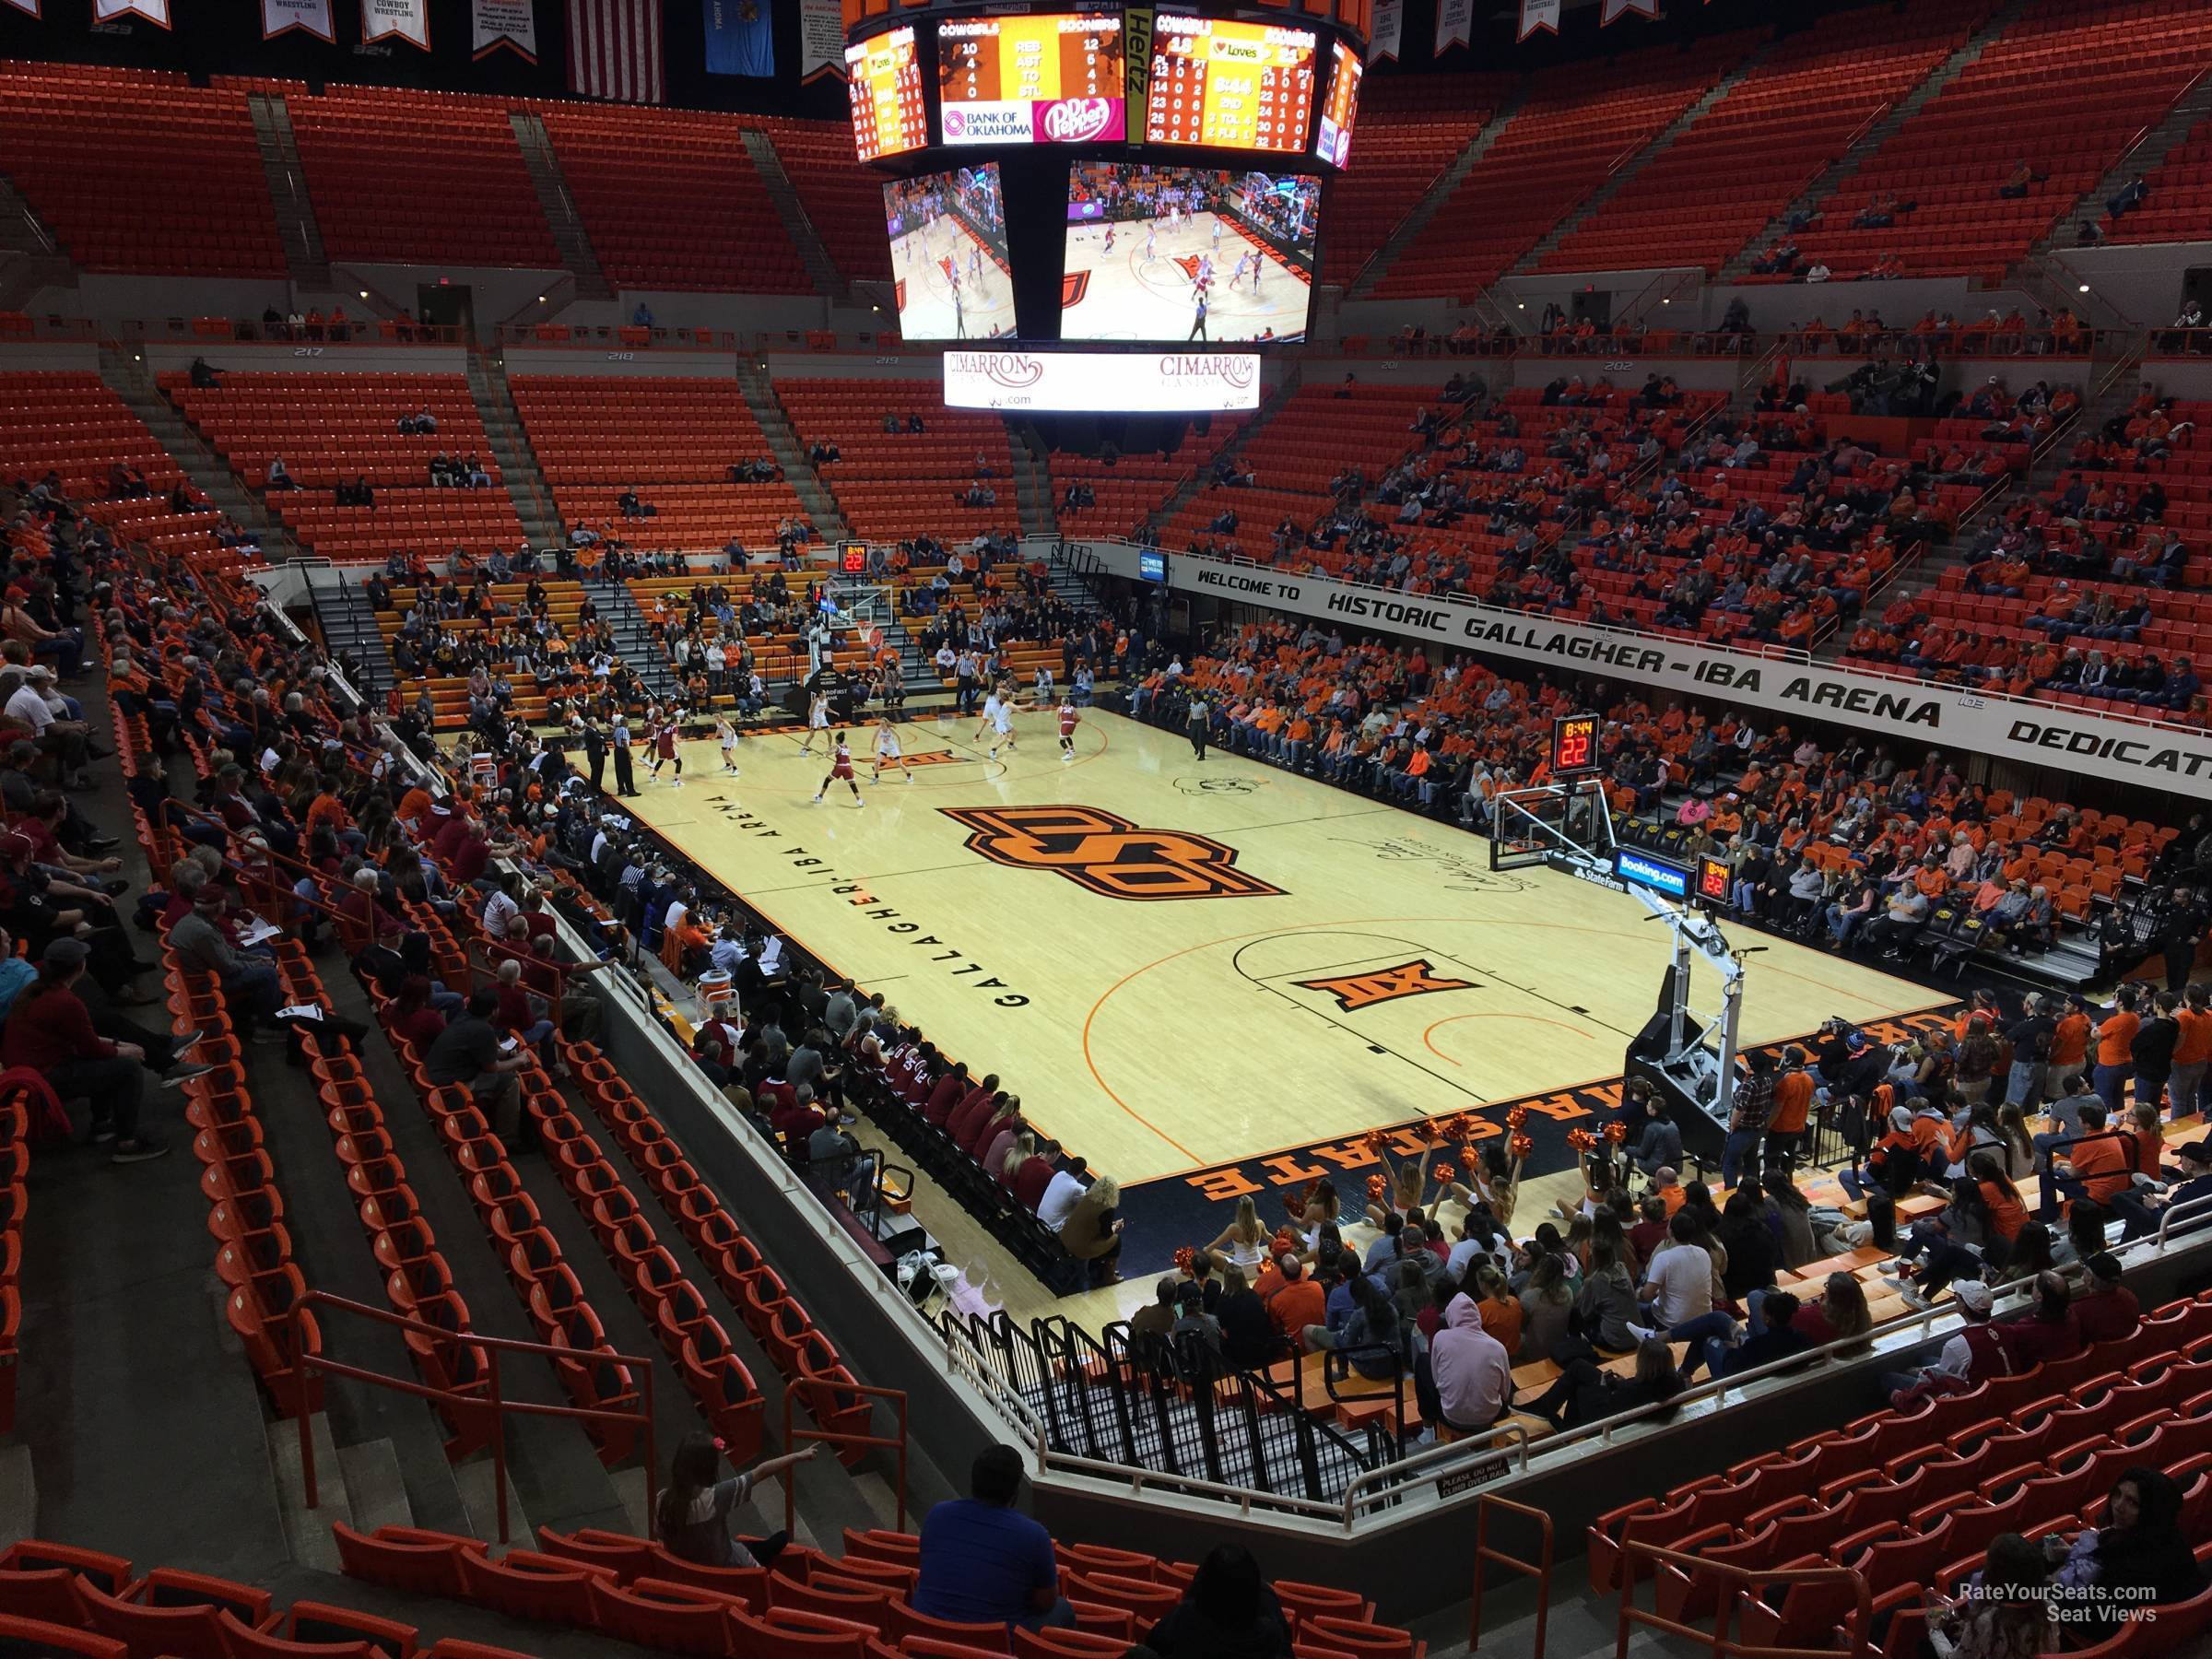 section 210, row 13 seat view  - gallagher-iba arena